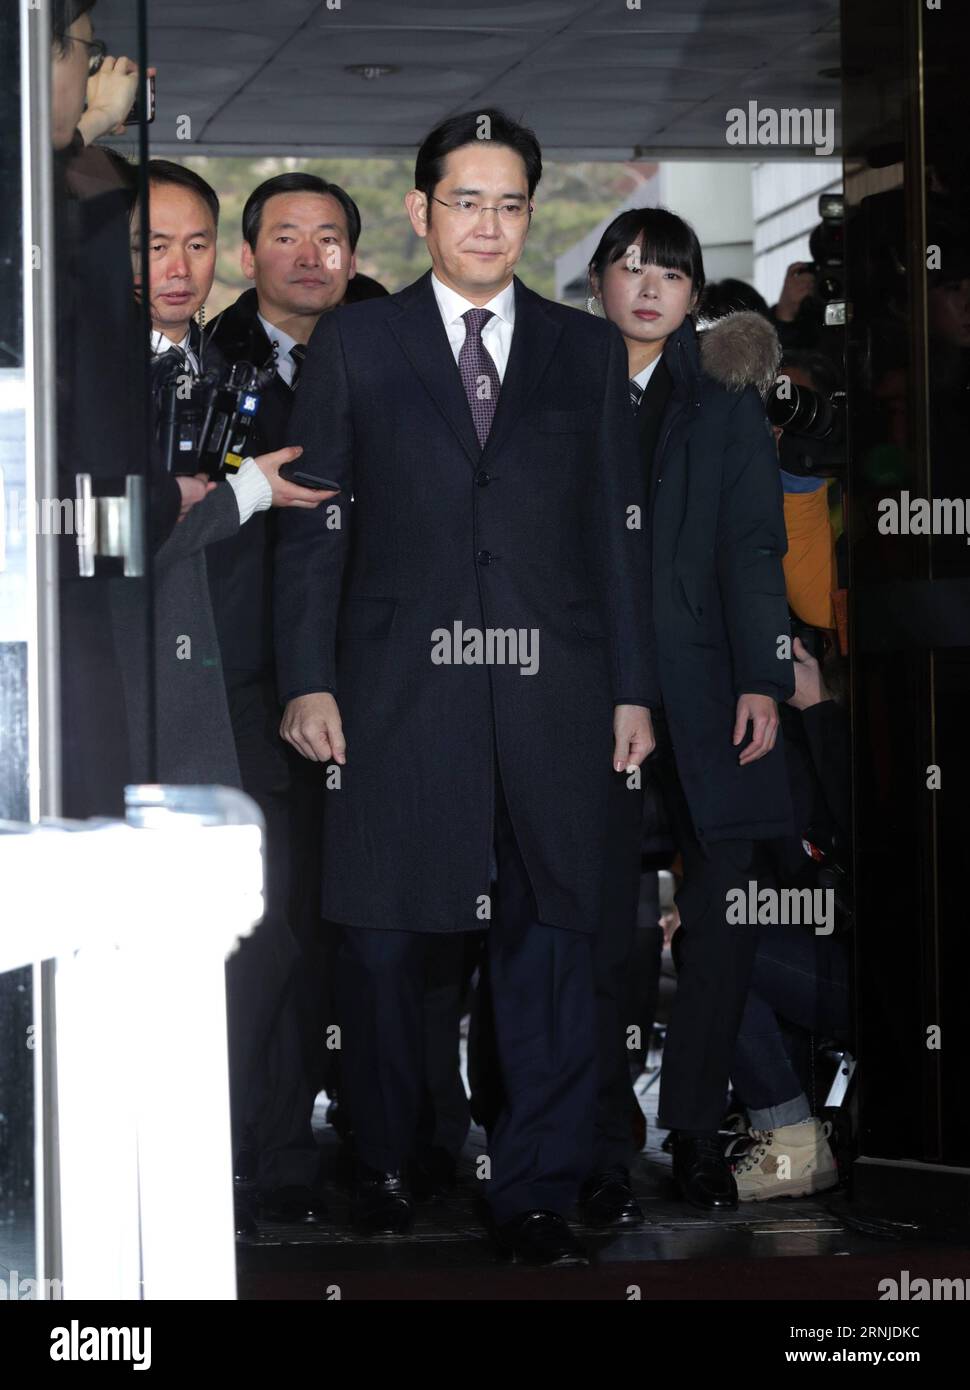 (170118) -- SEOUL, Jan. 18, 2017 -- Samsung Electronics Vice Chairman Lee Jae-yong (C) walks to attend a court hearing in Seoul, South Korea, Jan. 18, 2017. Samsung Electronics Vice Chairman Lee Jae-yong appeared in court on Wednesday for determination on his arrest warrant which prosecutors sought two days earlier. )(zcc) SOUTH KOREA-SEOUL-LEE JAE-YONG-HEARING LeexSang-ho PUBLICATIONxNOTxINxCHN   Seoul Jan 18 2017 Samsung Electronics Vice Chairman Lee Jae Yong C Walks to attend a Court Hearing in Seoul South Korea Jan 18 2017 Samsung Electronics Vice Chairman Lee Jae Yong appeared in Court ON Stock Photo